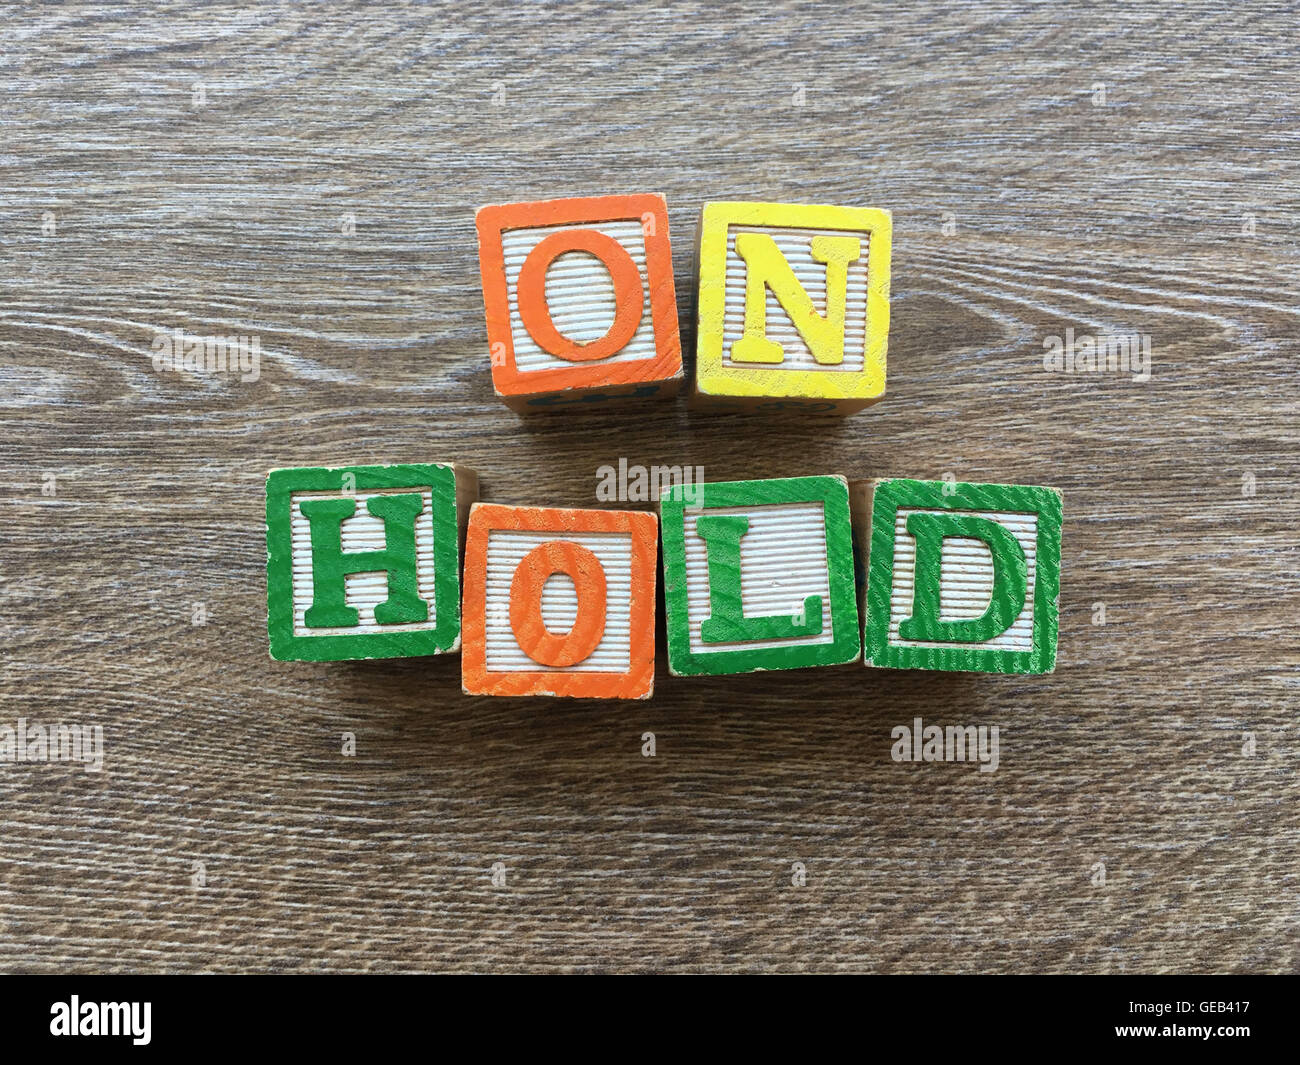 ON HOLD sentence written with wood block letter characters Stock Photo